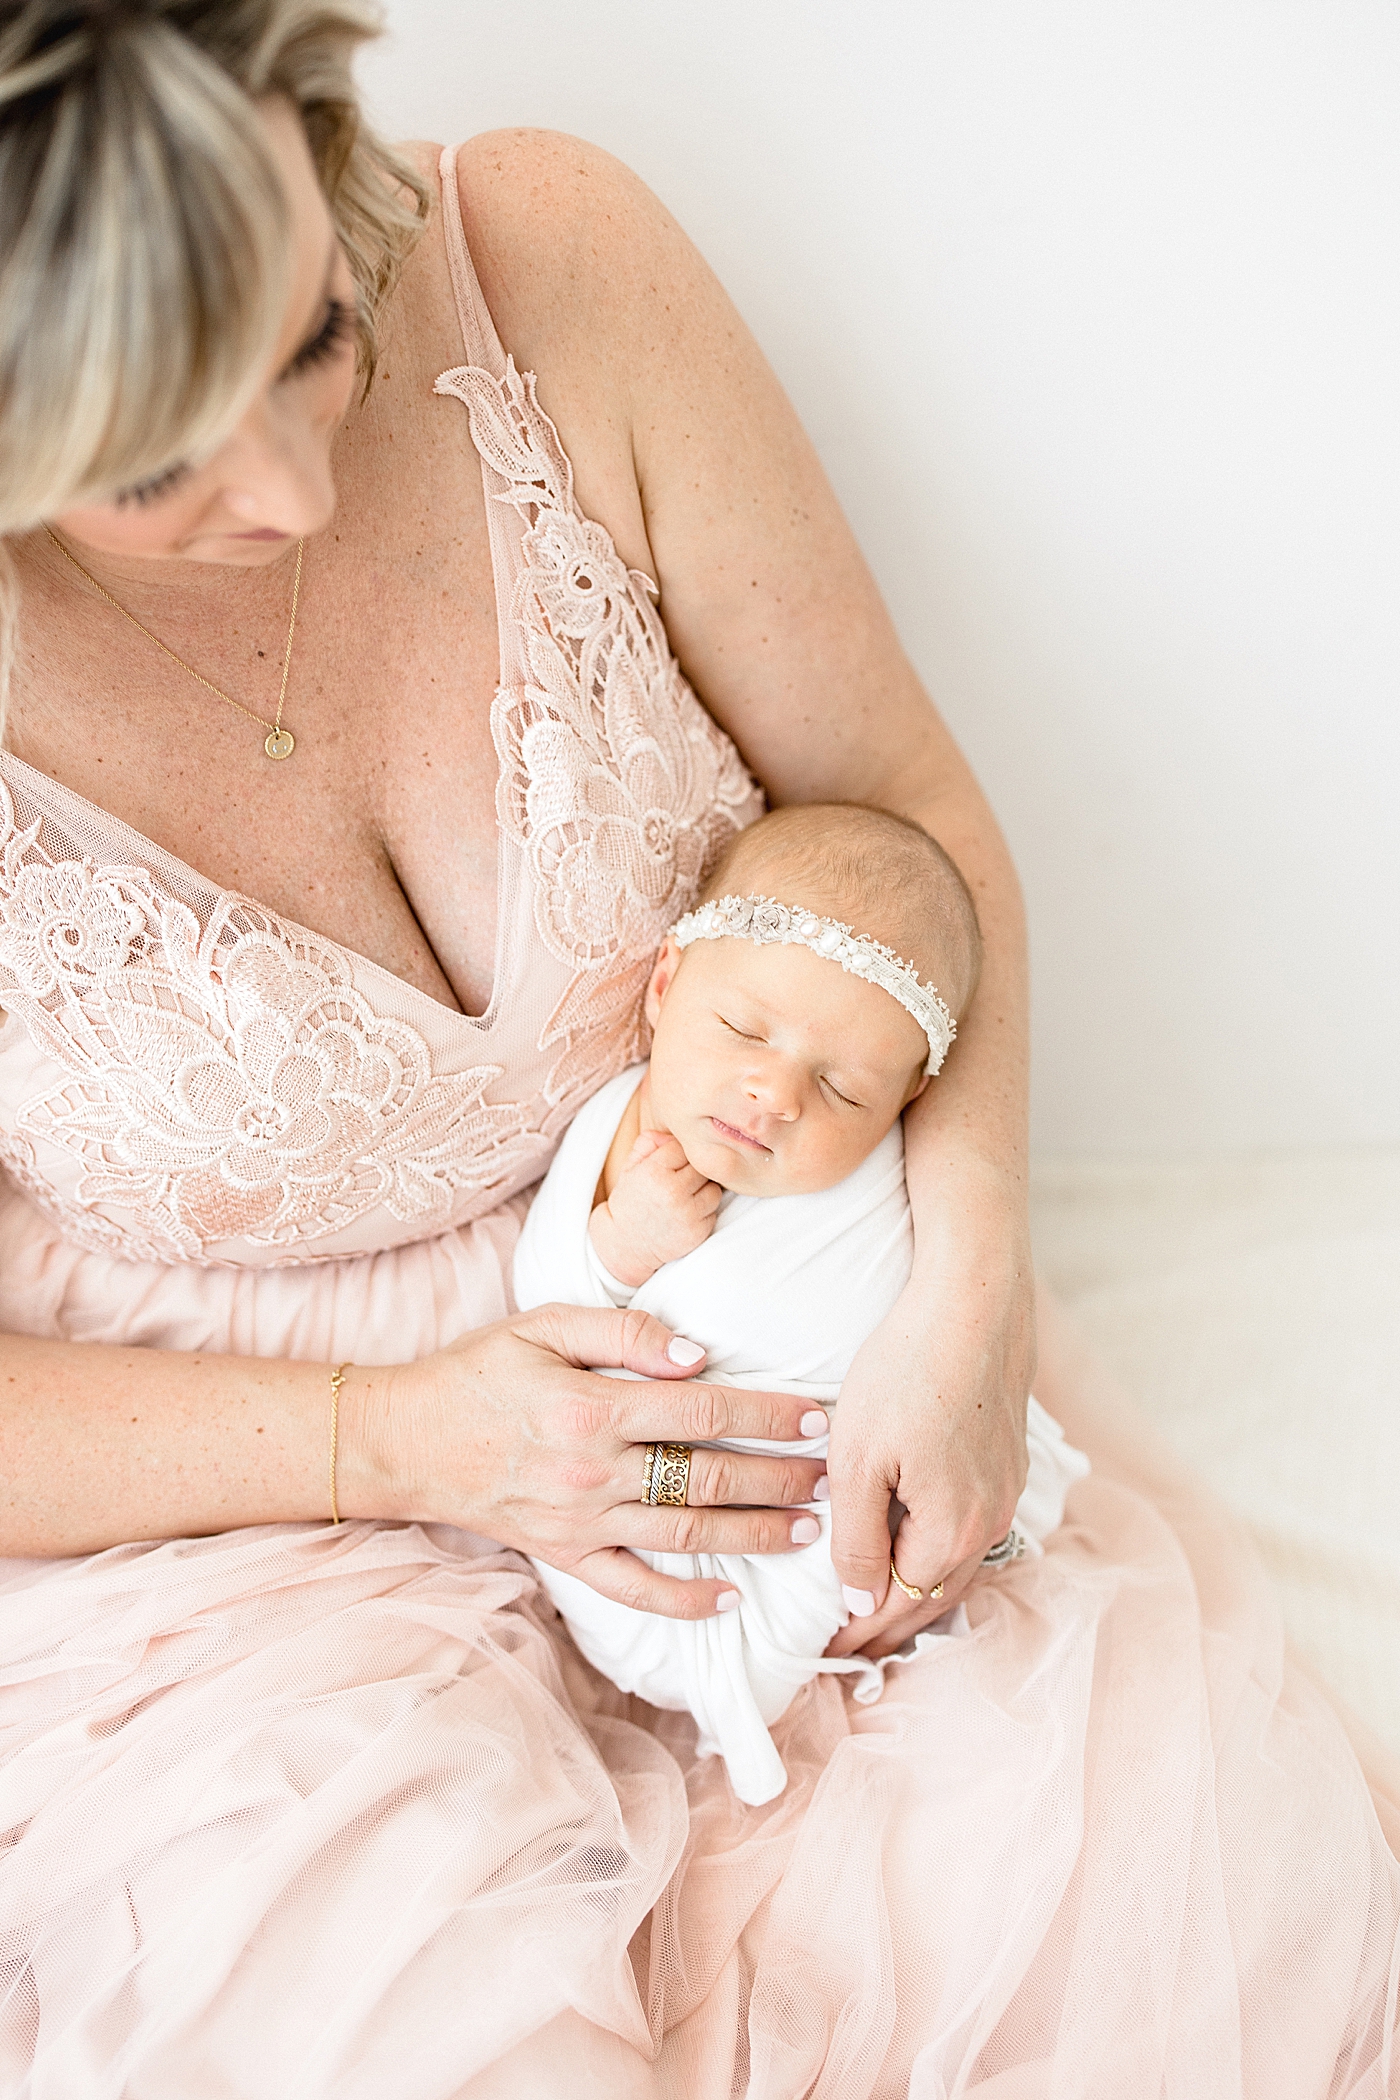 Mom holding her baby girl. Photo by Tampa Newborn Photographer, Brittany Elise Photography.